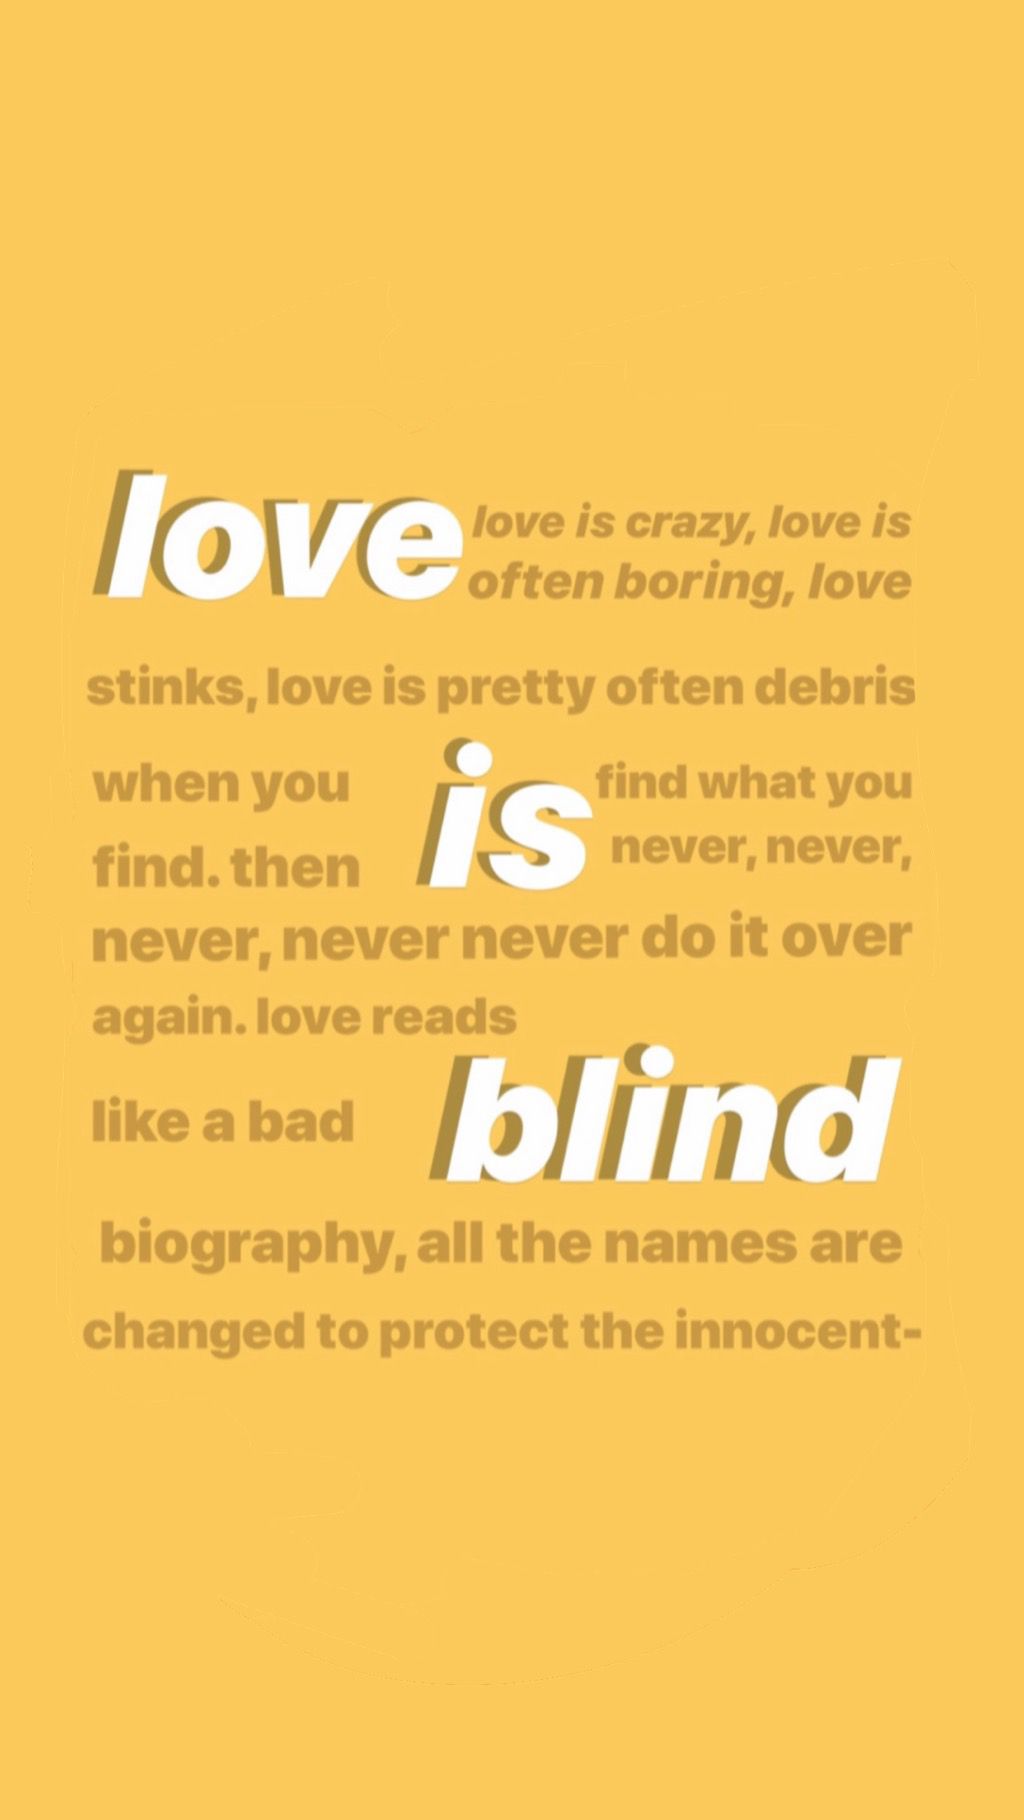 love is blind. Theatre life, Broadway musicals